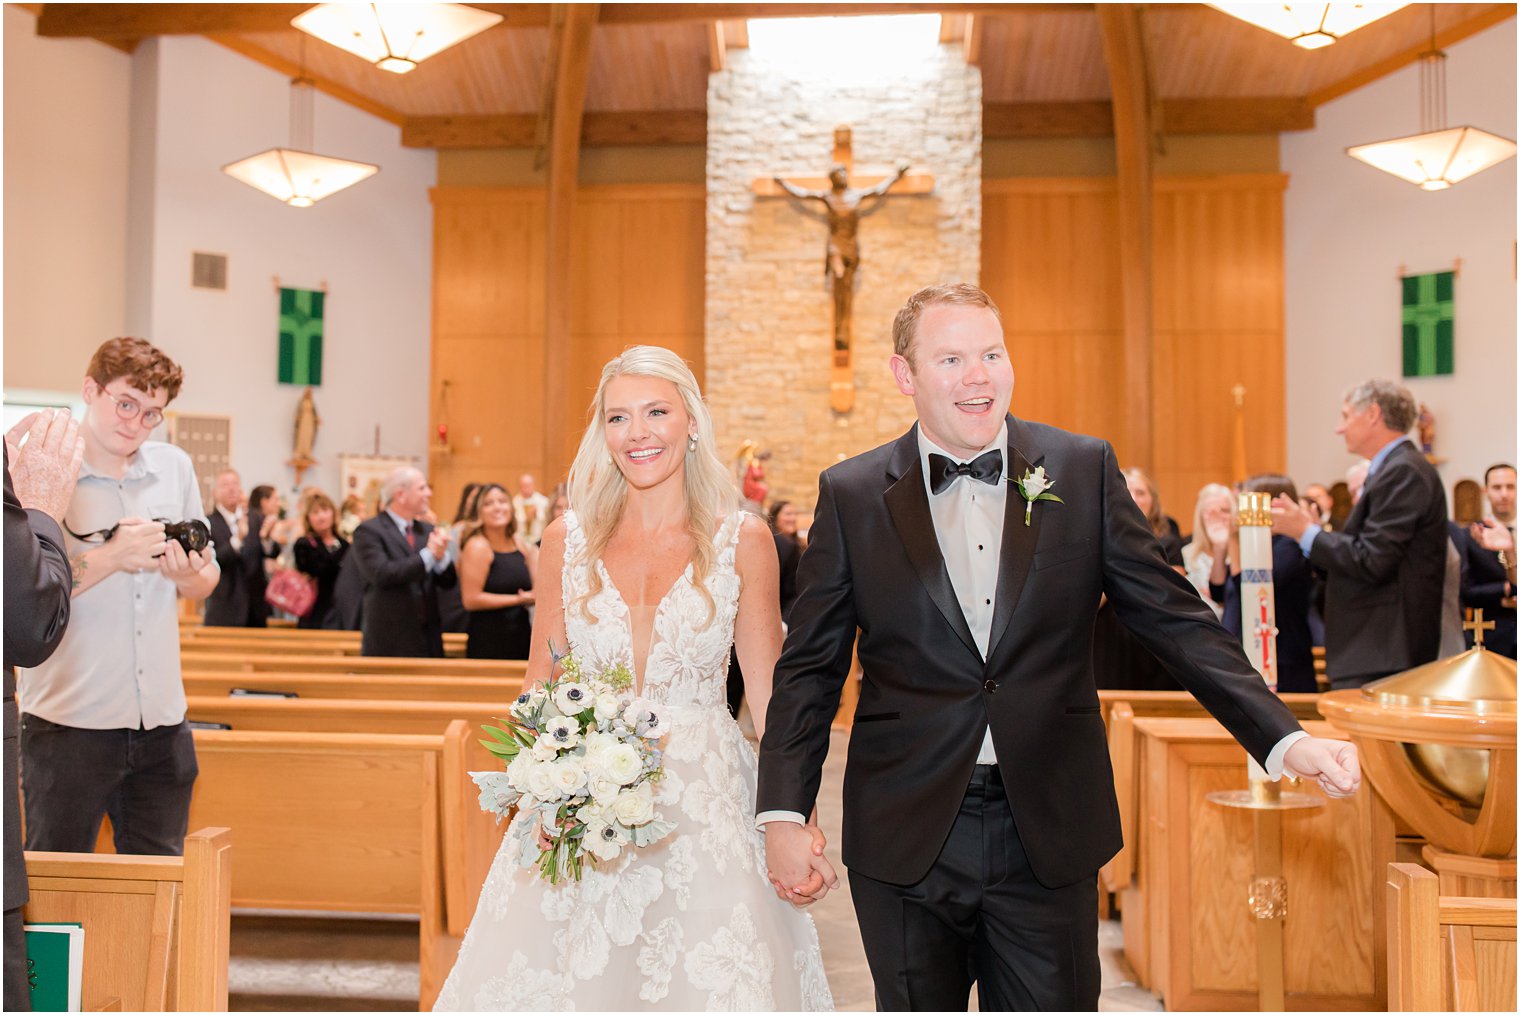 newlyweds walk up aisle holding hands after traditional church wedding in New Jersey